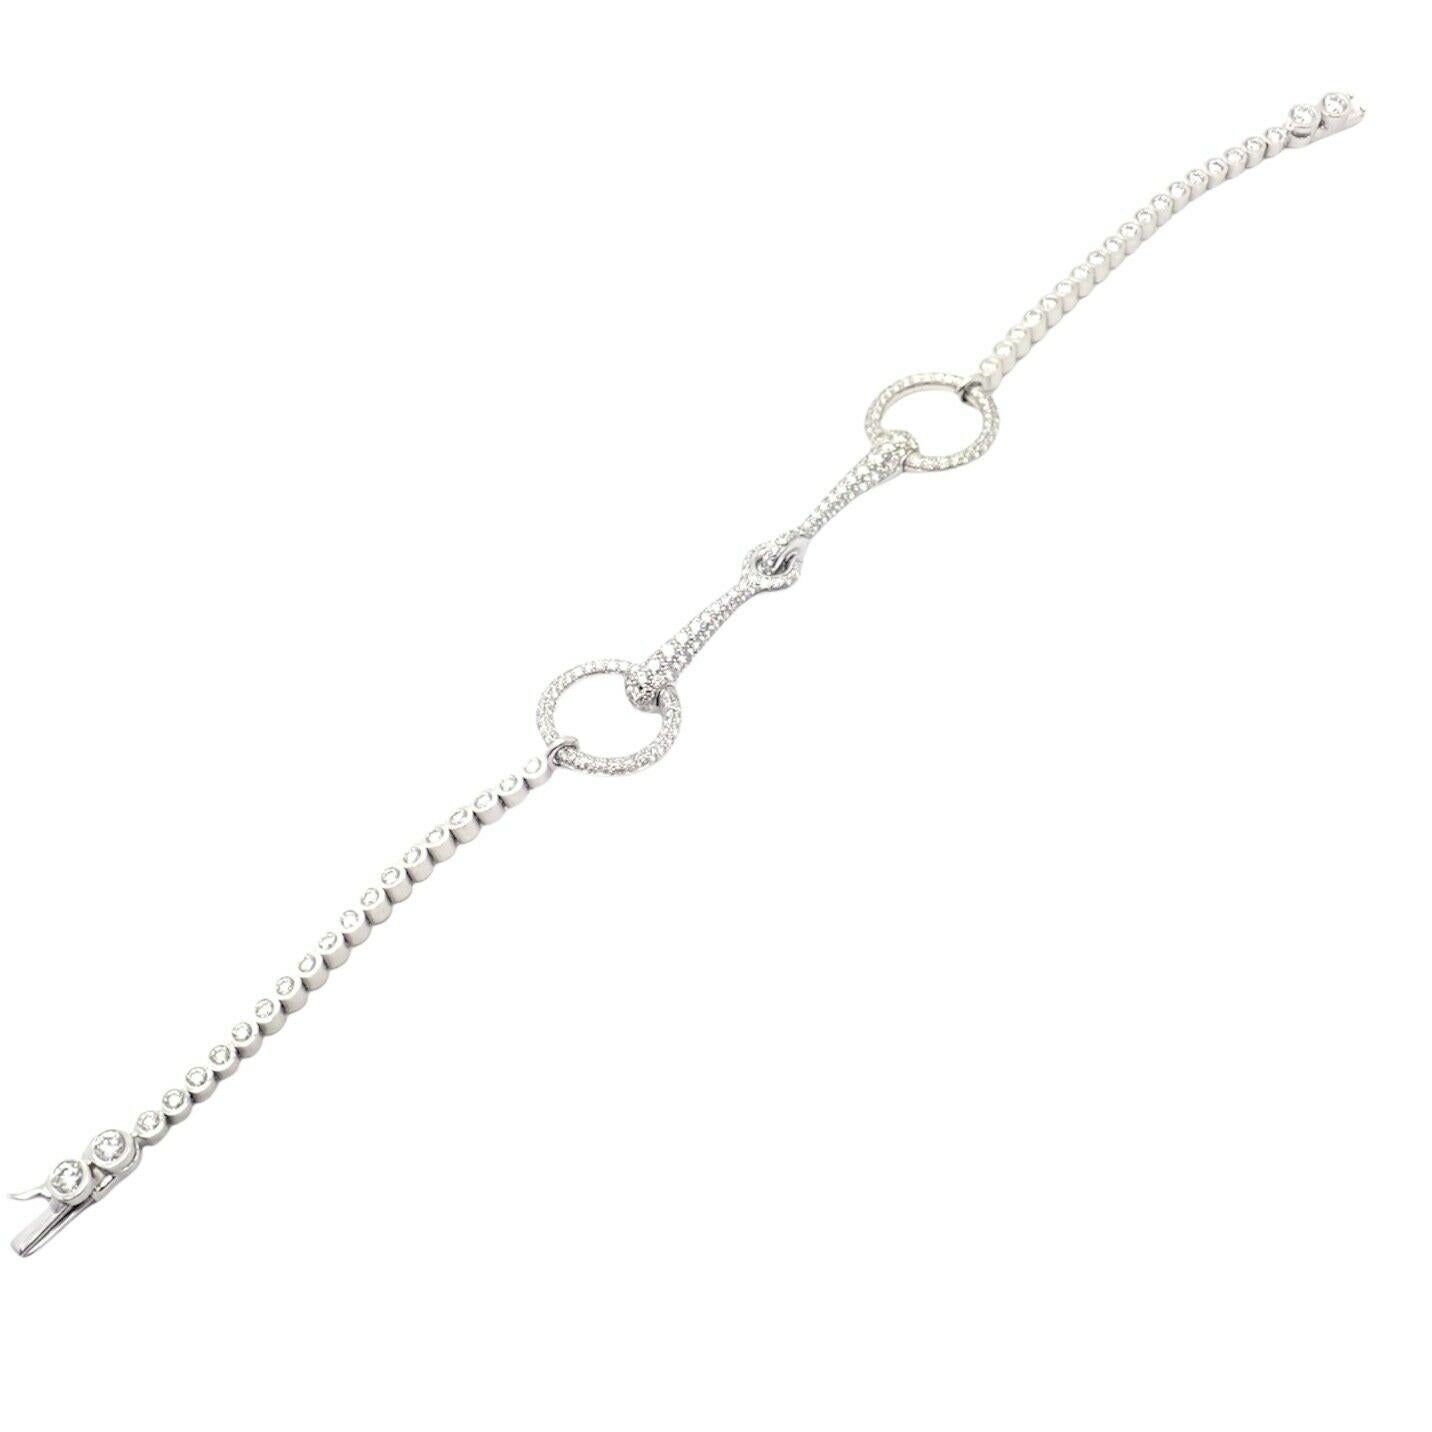 18k White Gold Diamond Filet d'Or Tennis Bracelet by Hermes. 
With 240 Brilliant Cut Diamonds VS1 clarity, G color total weight approximately 1.77ct
Details: 
Length: Size: 6.5